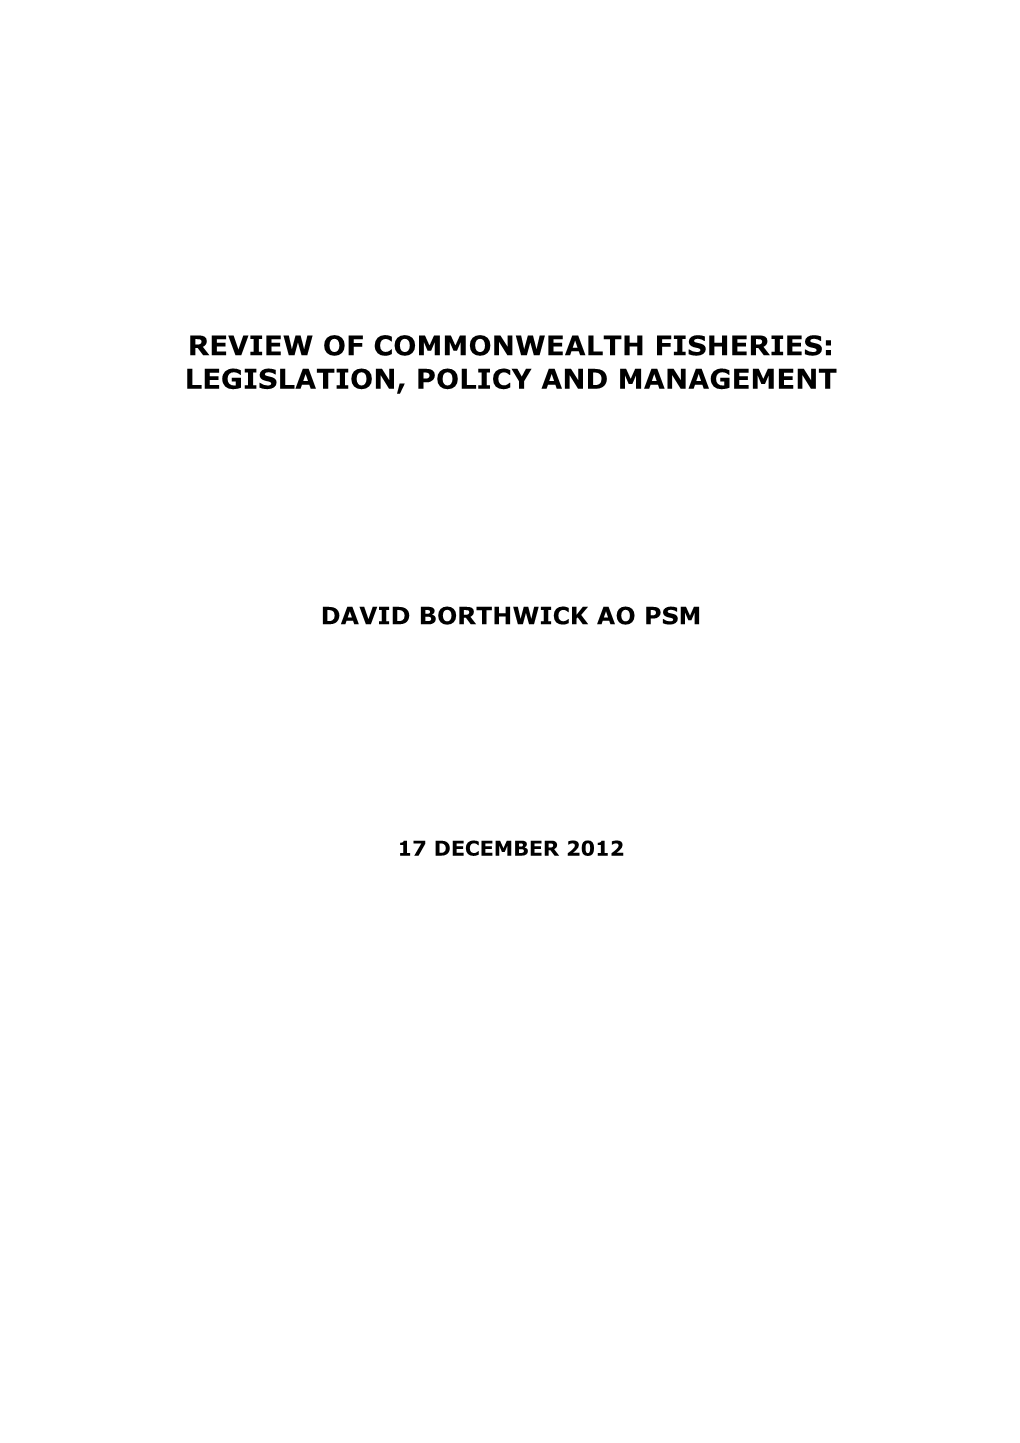 Review of Commonwealth Fisheries: Legislation, Policy and Management